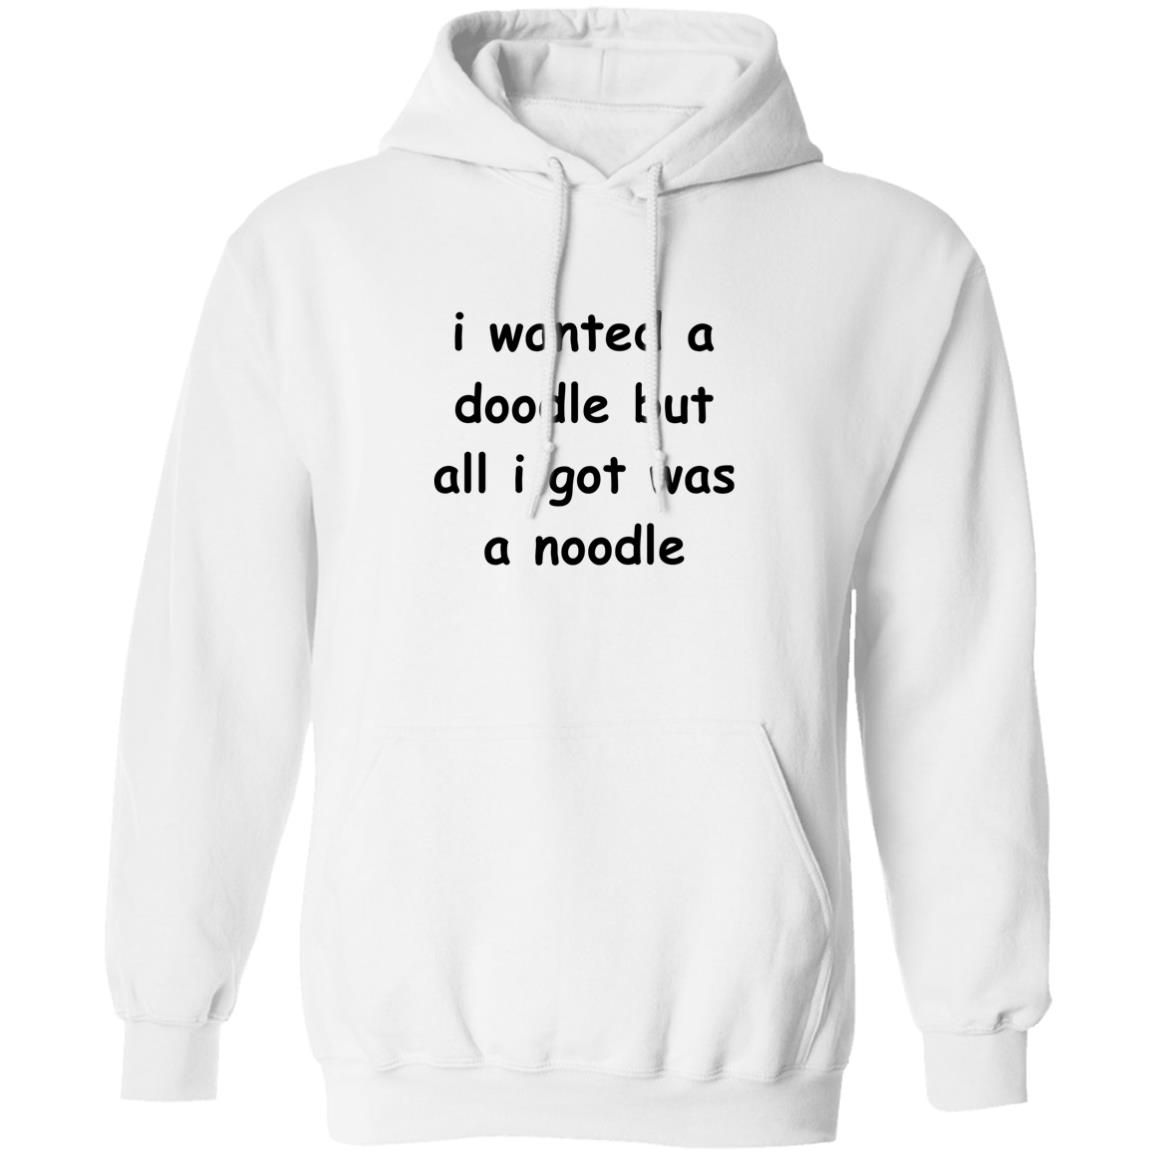 I Wanted A Doodle But All I Got Was A Noodle Shirt Panetory – Graphic Design Apparel &Amp; Accessories Online